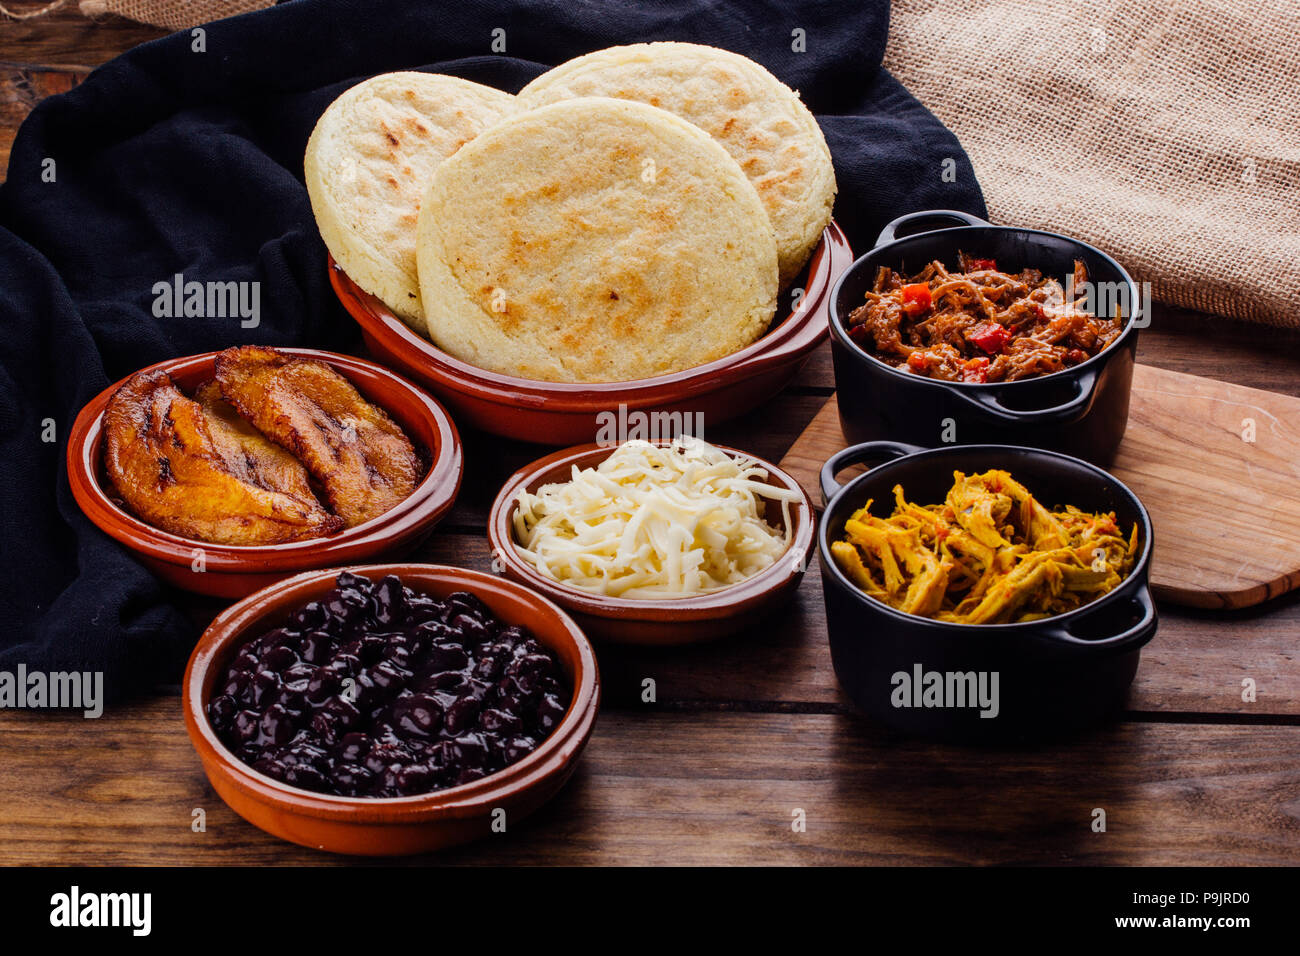 ingredients to fill Venezuelan arepas, mechada meat, chicken, black beans, fried plantain and cheese on a wooden rustic table Stock Photo